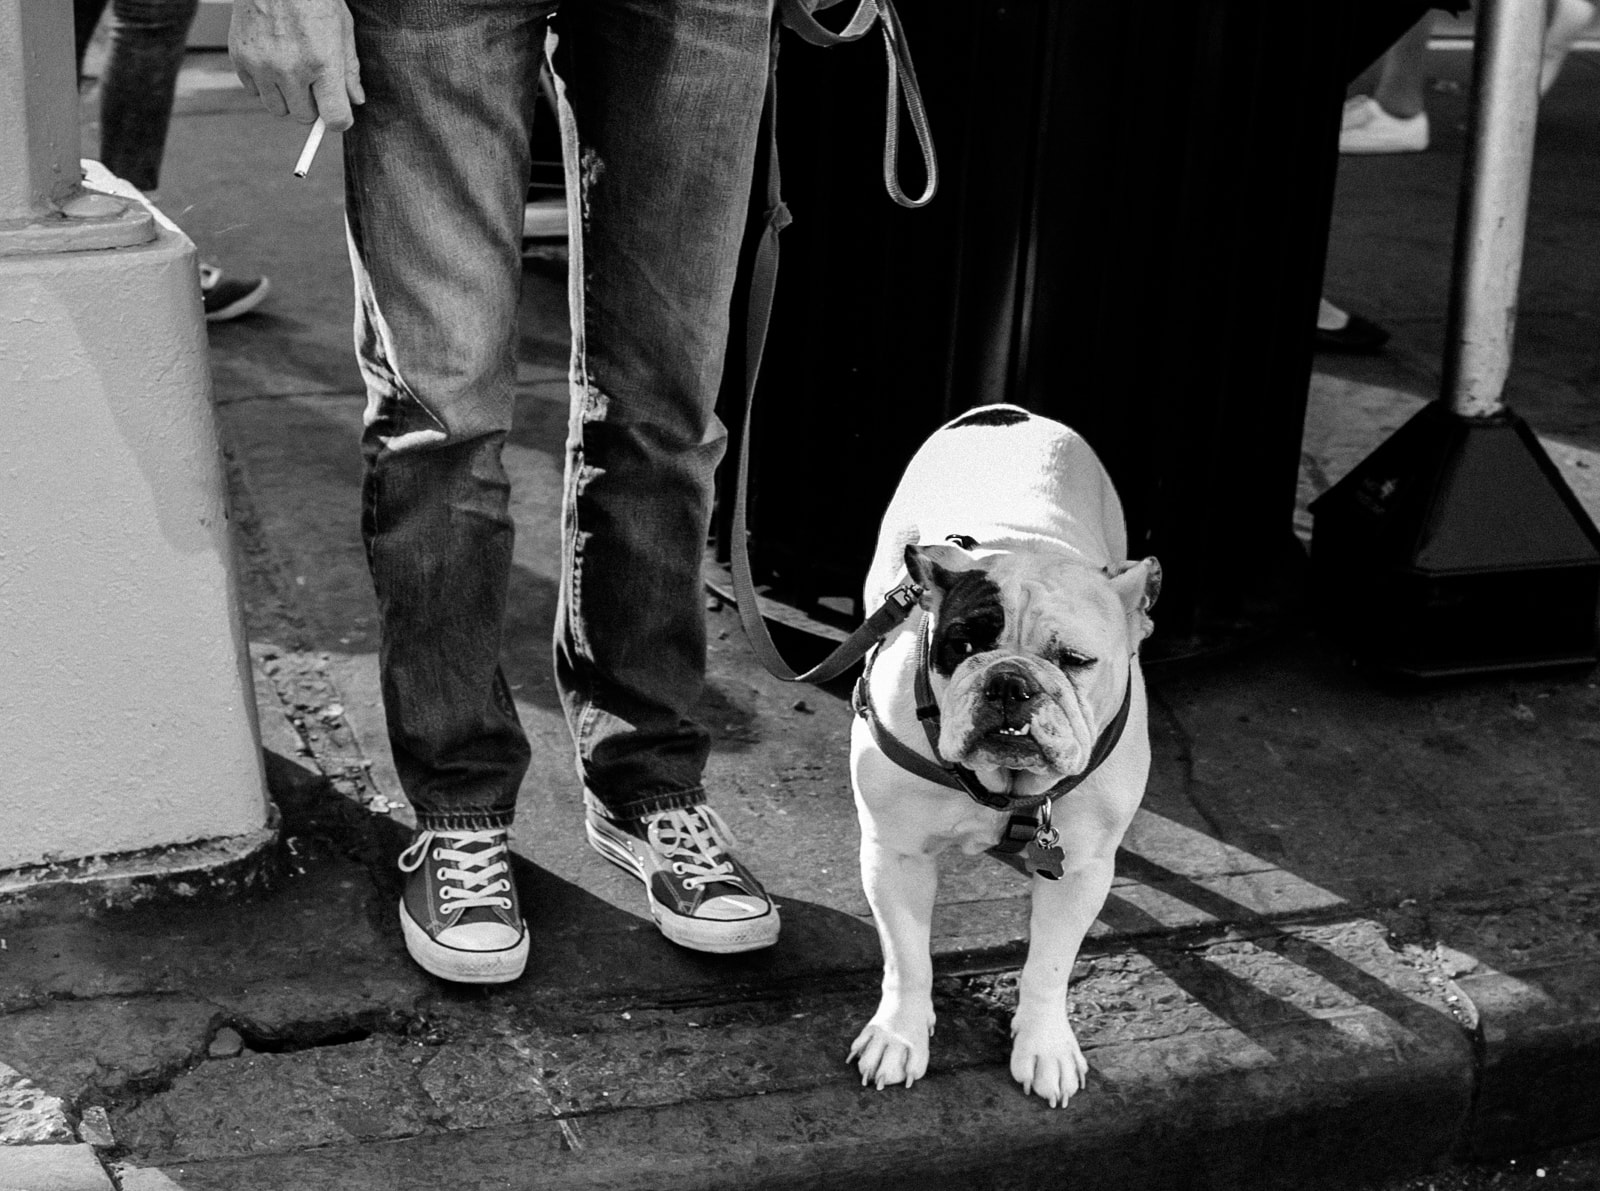 New York City Street Photography, The People And Textures Of NYC